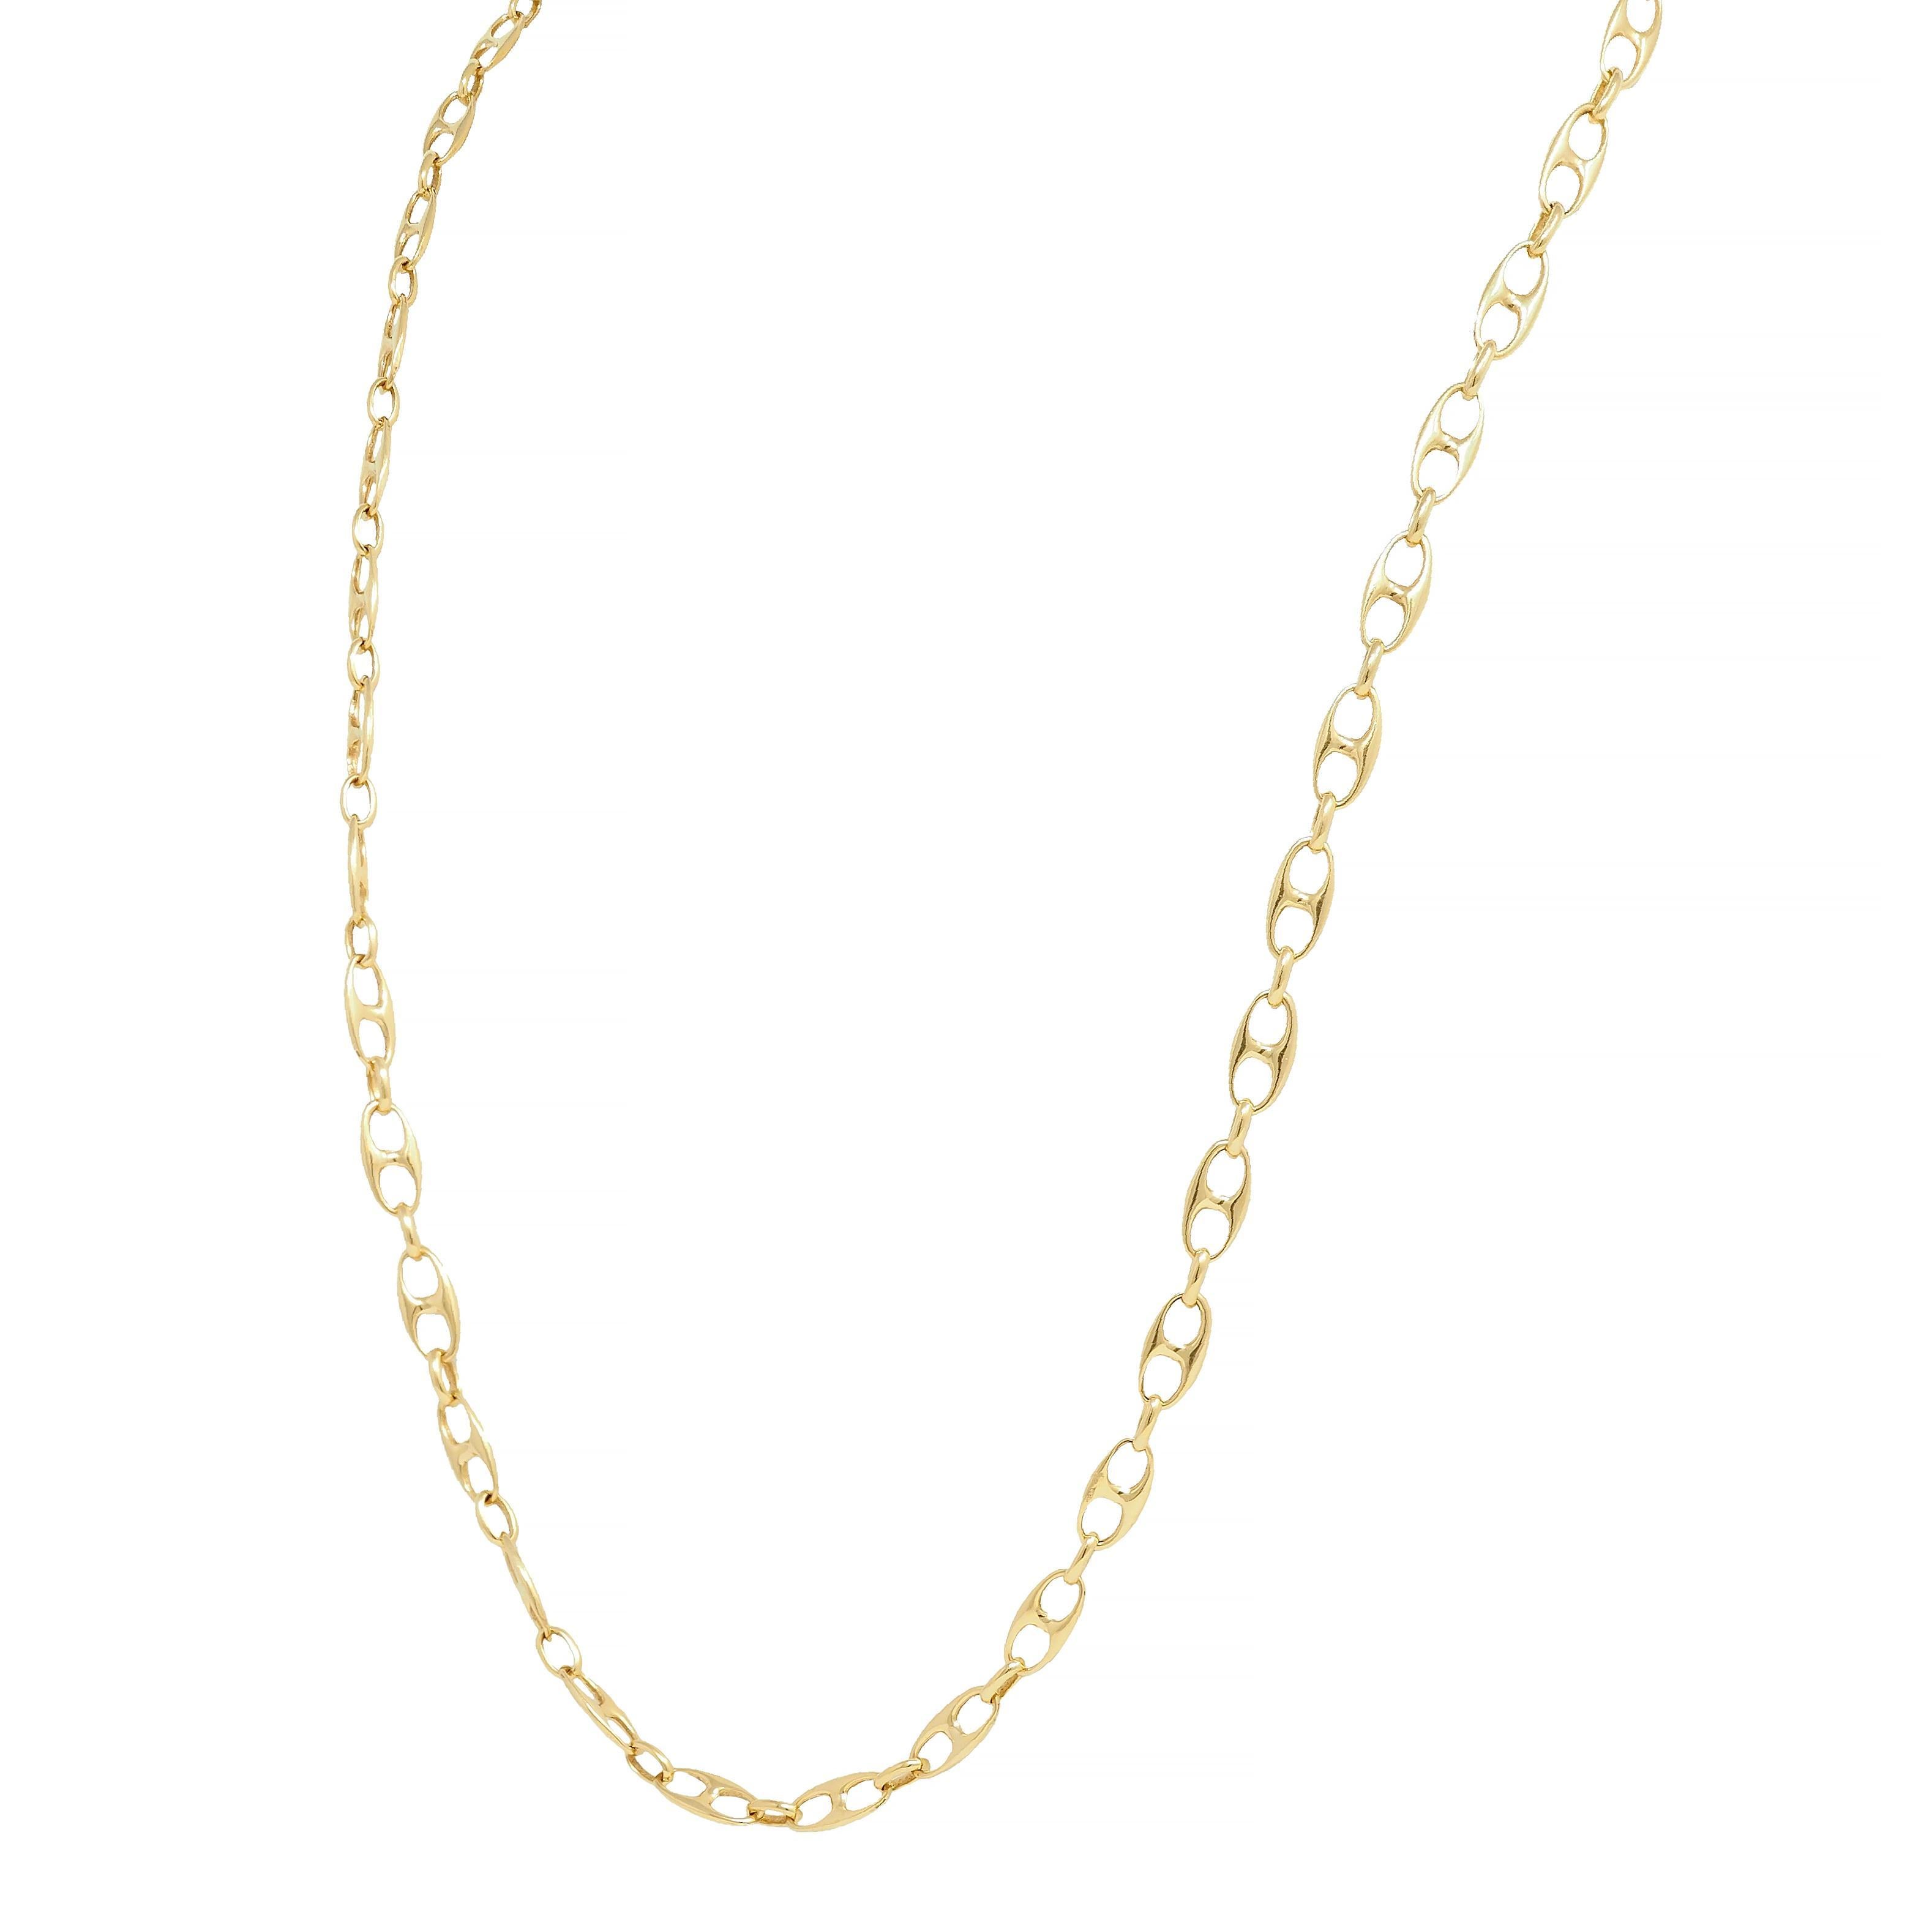 Vintage 18 Karat Yellow Gold Fancy Mariner Link Chain Necklace For Sale 2